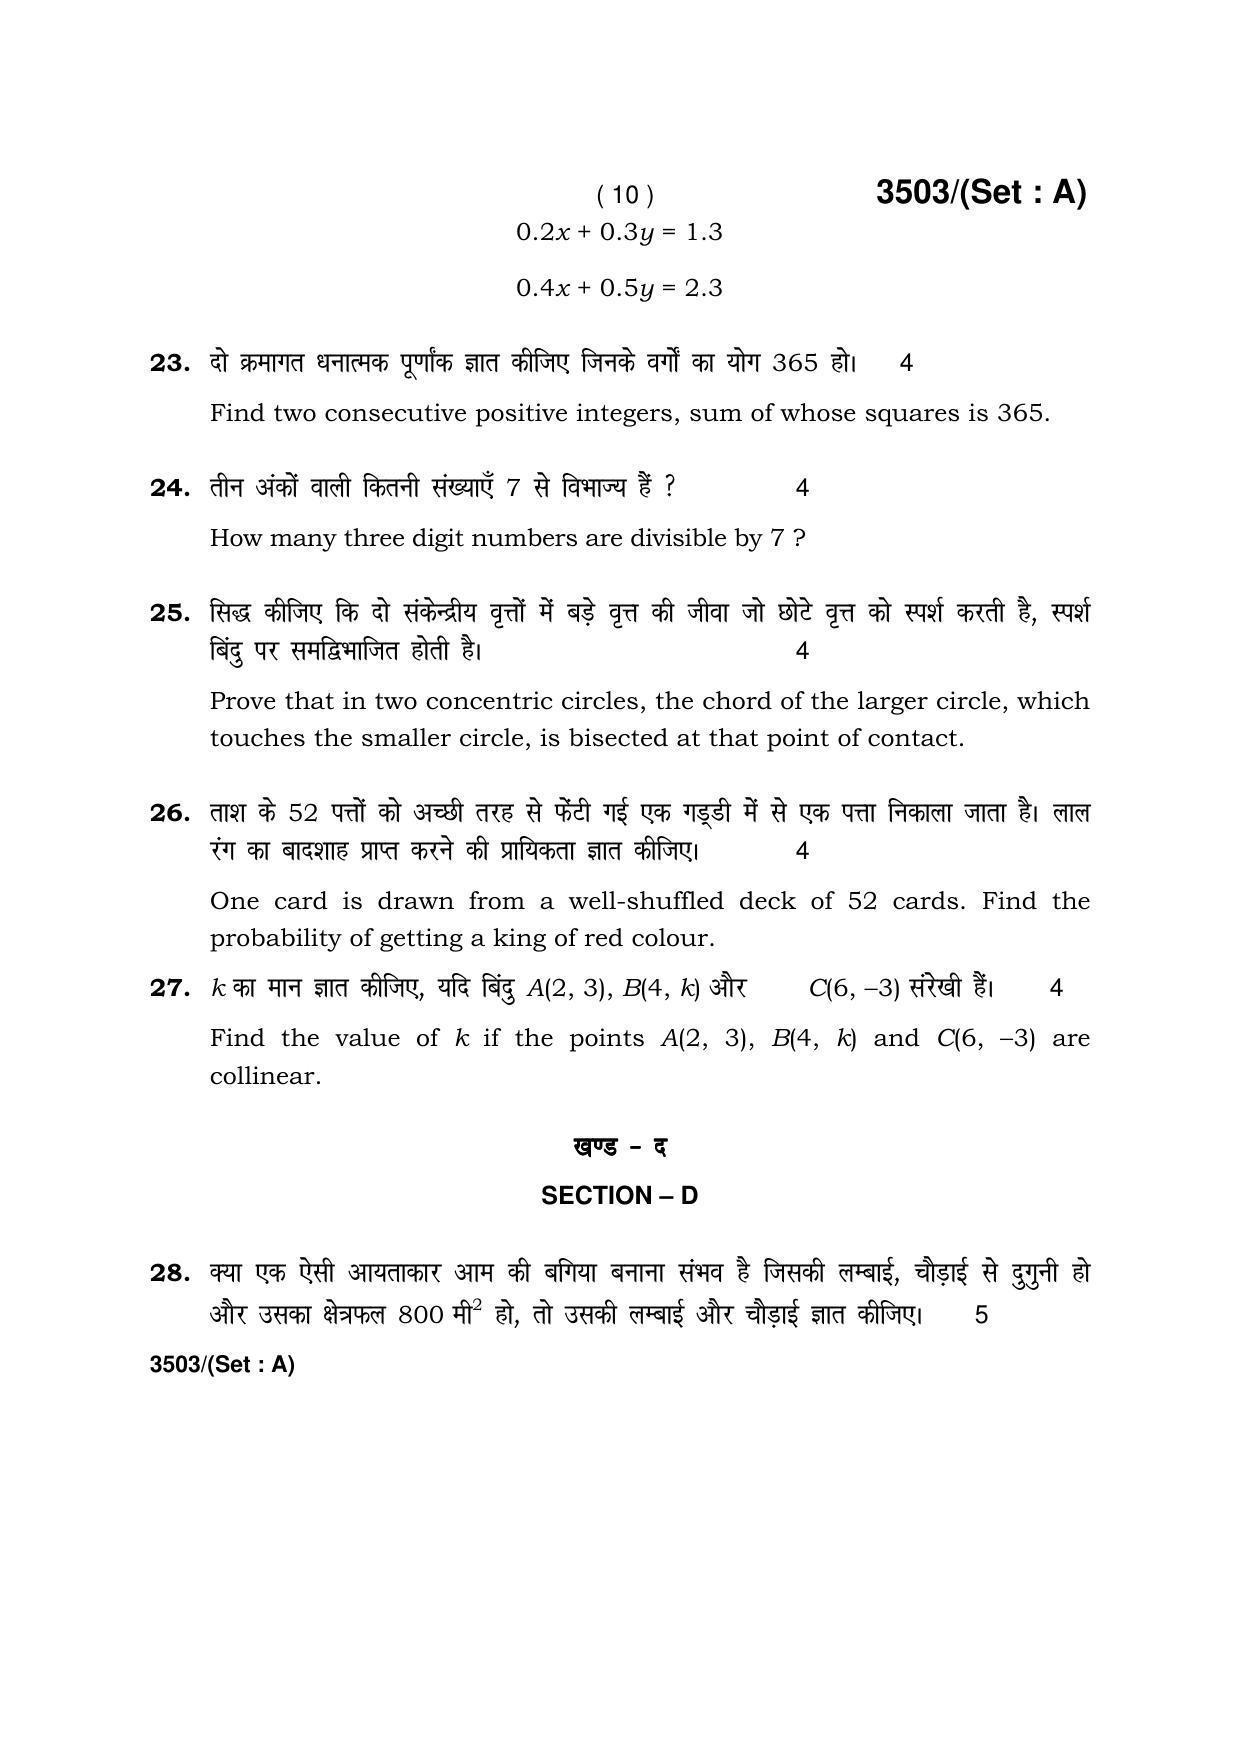 Haryana Board HBSE Class 10 Mathematics -A 2018 Question Paper - Page 10